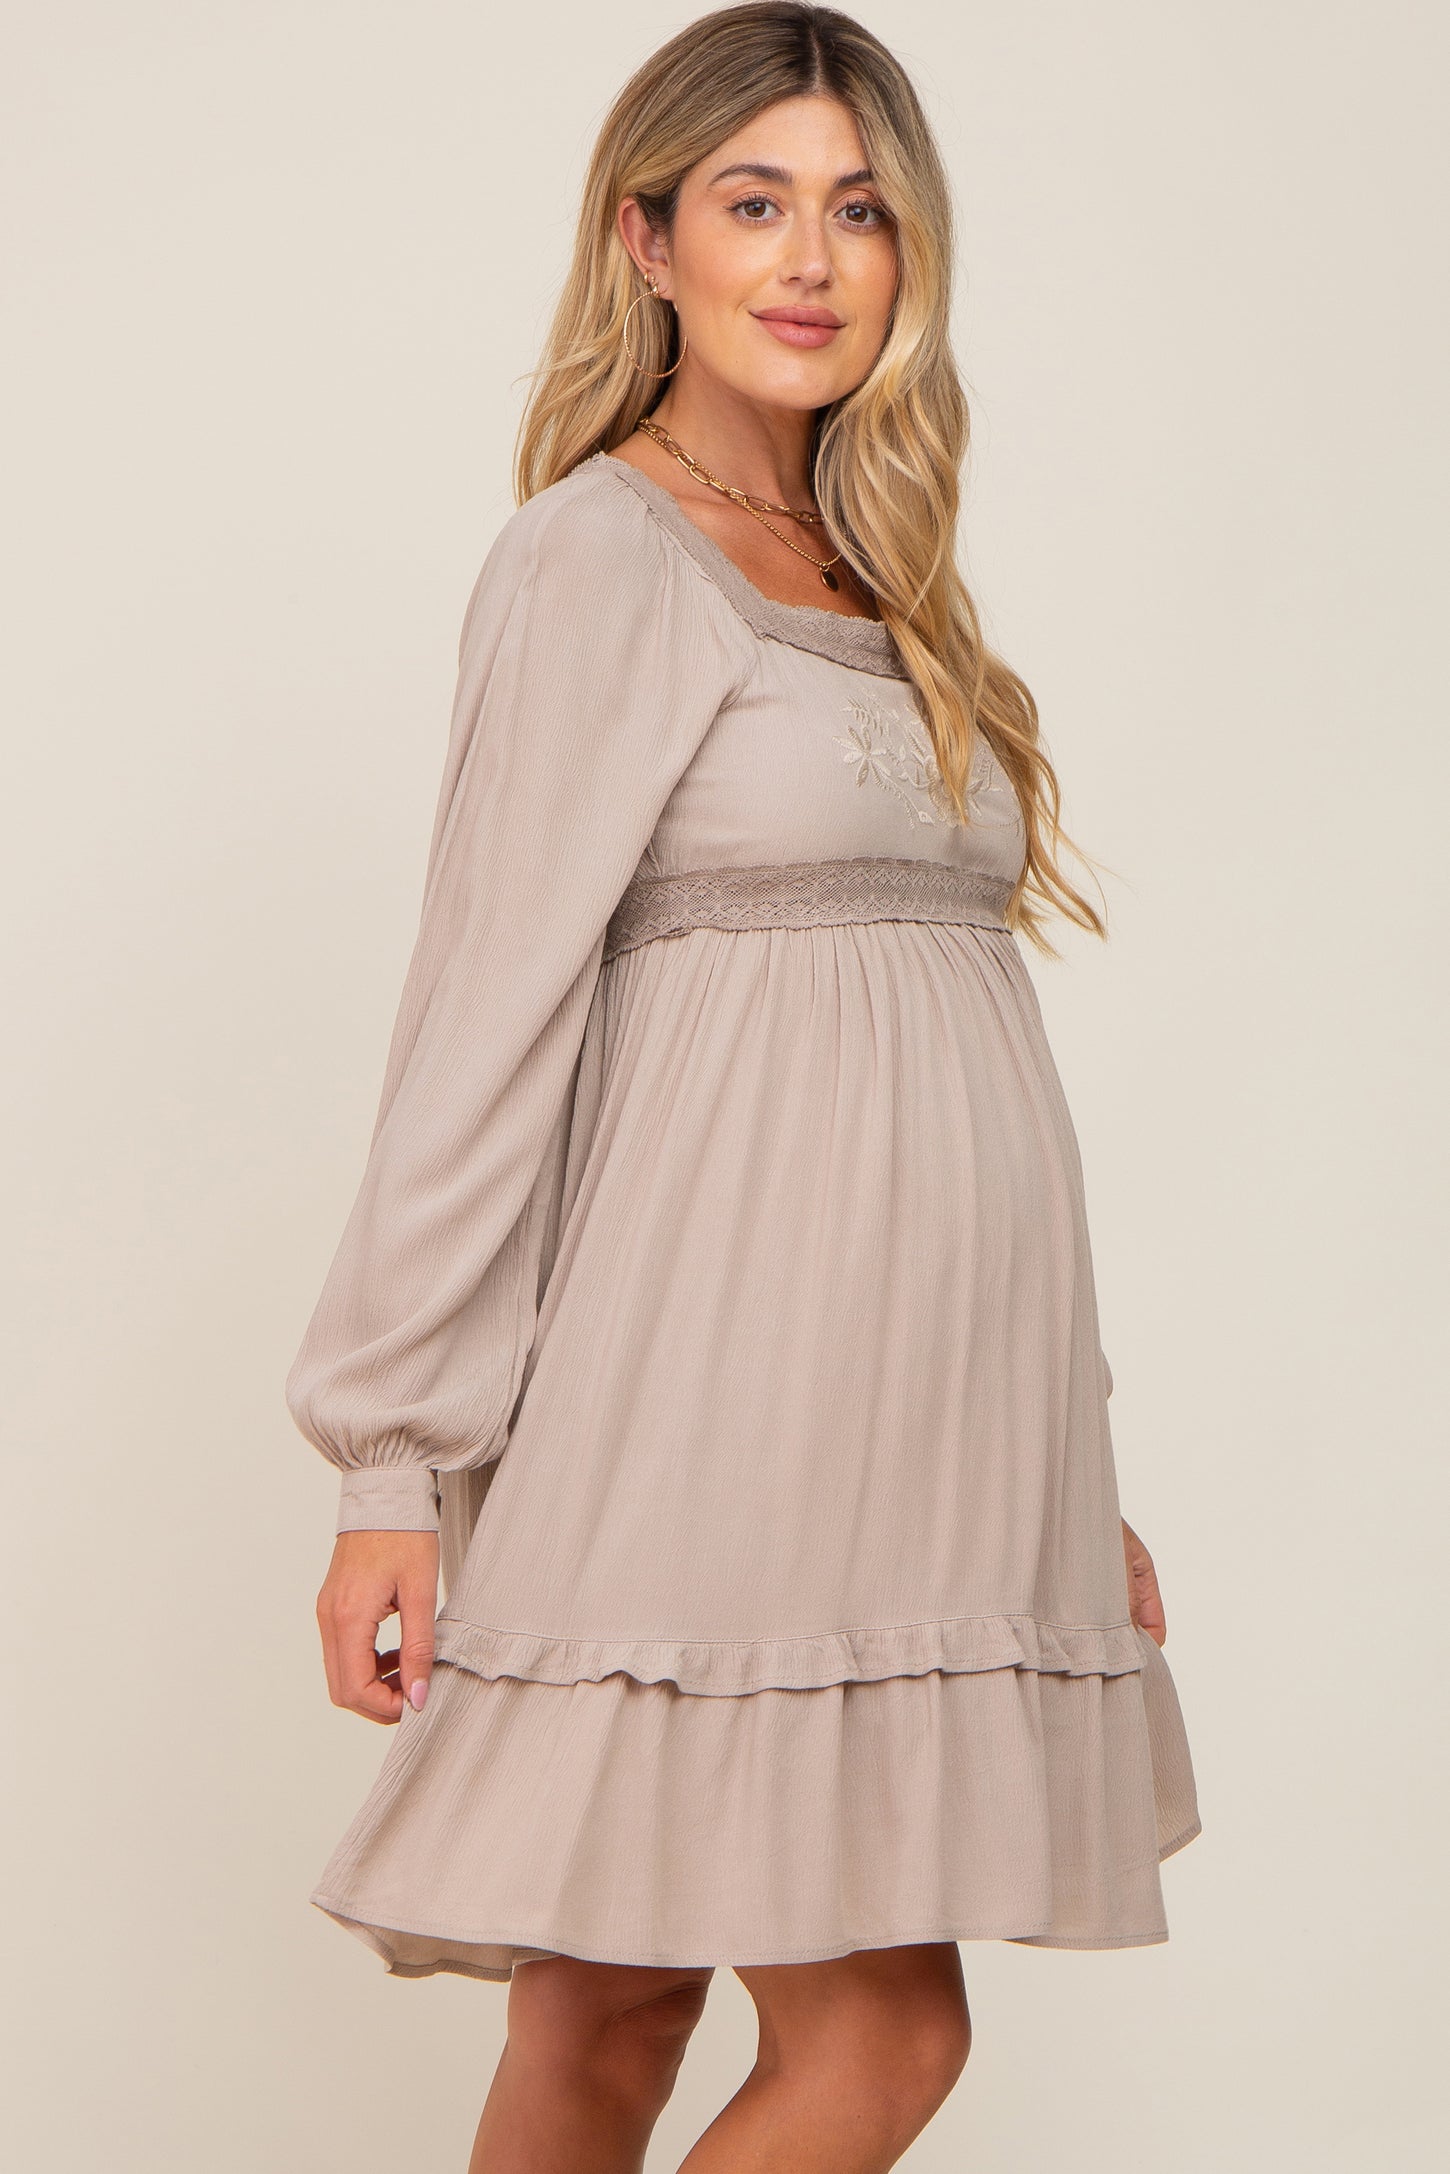 Taupe Lace Embroidered Square Neck Maternity Dress